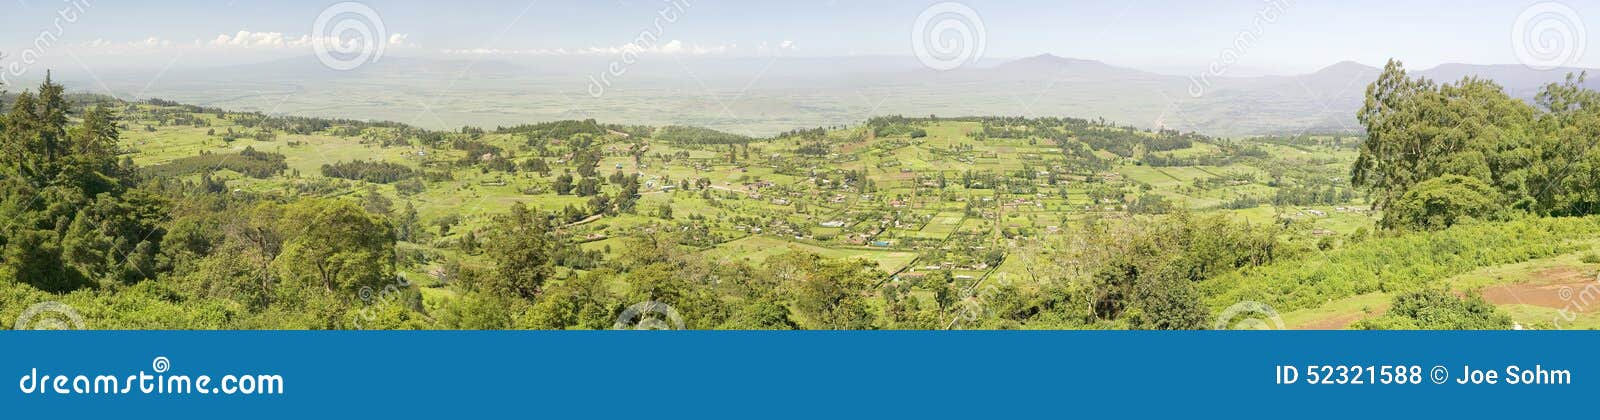 panoramic view of great rift valley in spring after much rainfall, kenya, africa